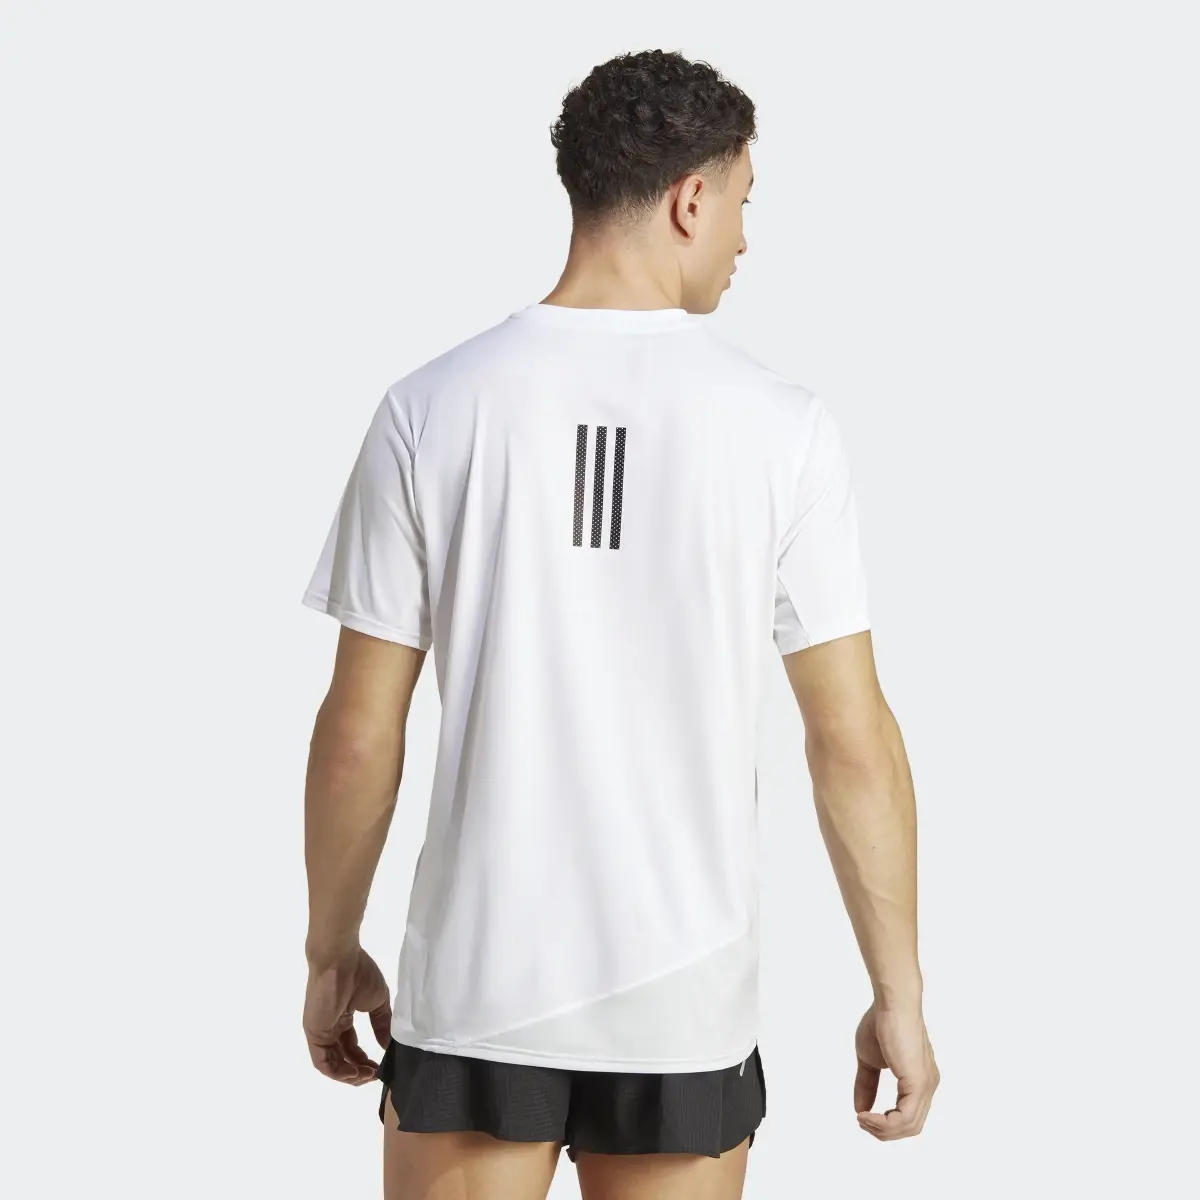 Adidas Made to be Remade Running Tee. 3